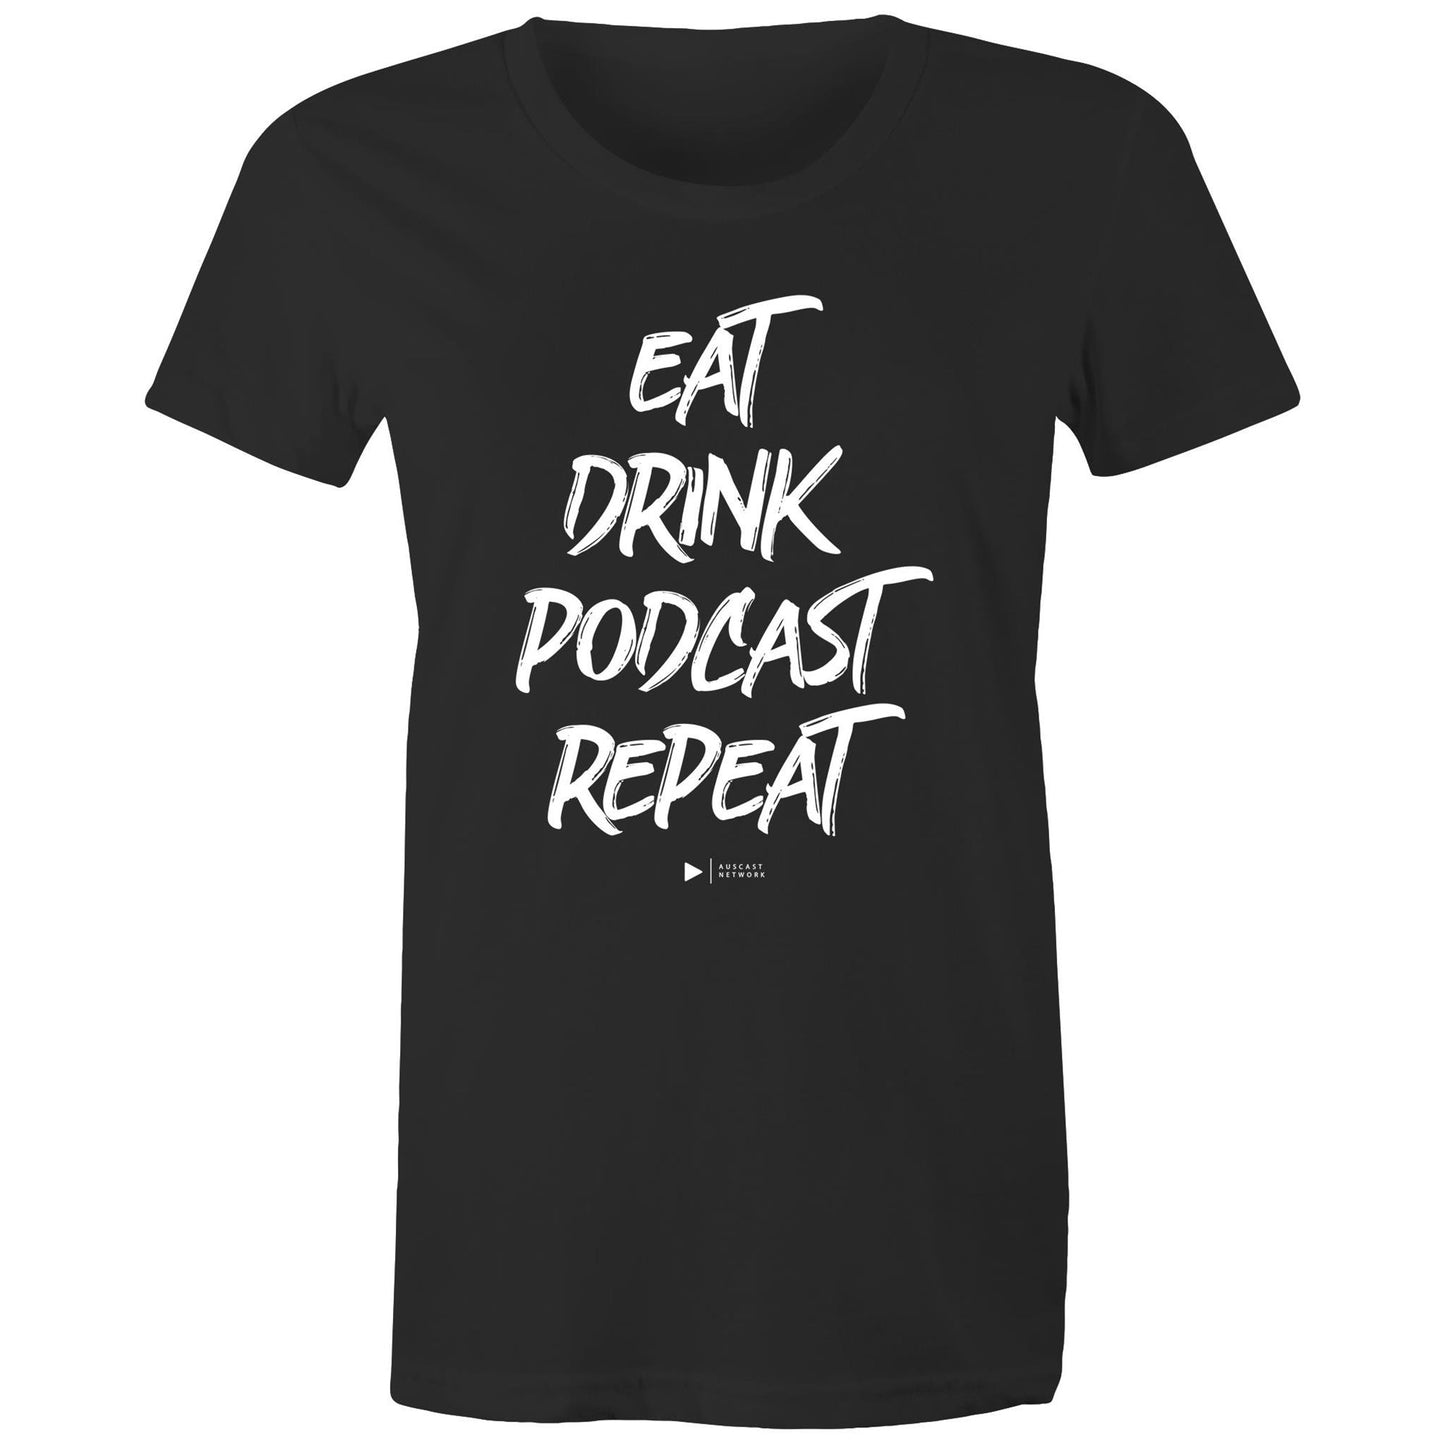 Eat, Drink, Podcast, Repeat (White Font) - AS Colour - Women's Maple Organic Tee